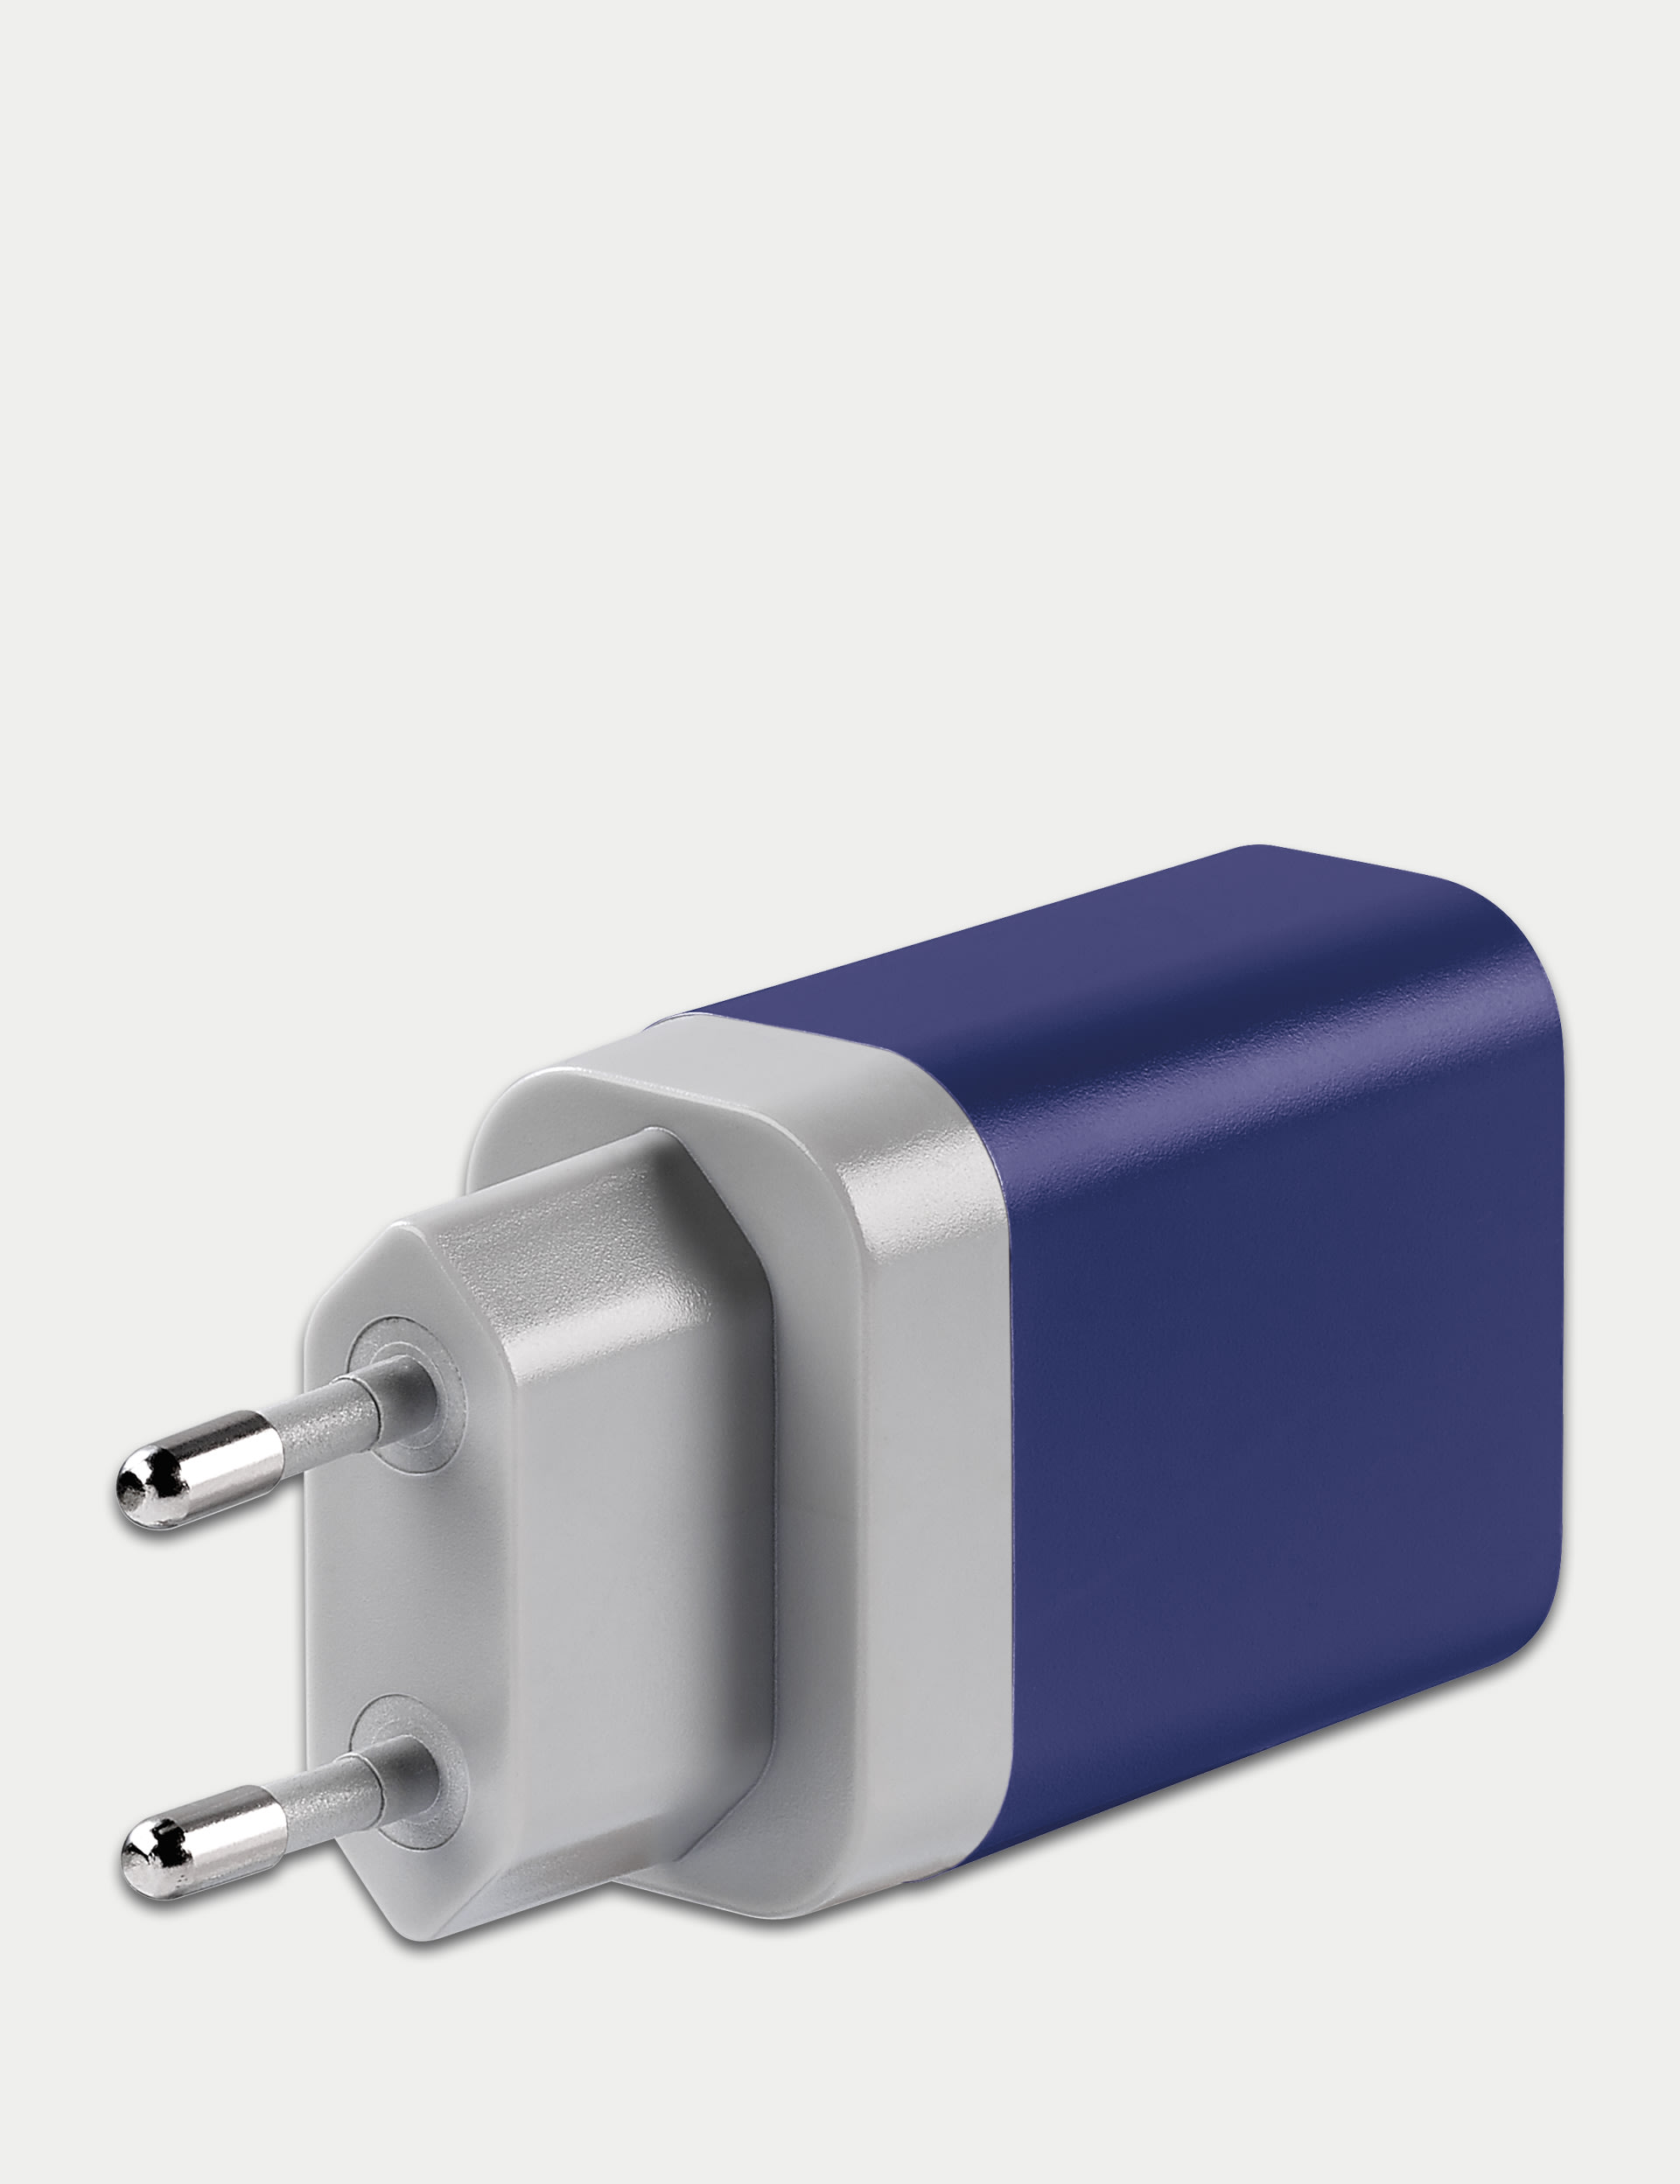 Worldwide USB A & C Charger 5 of 7